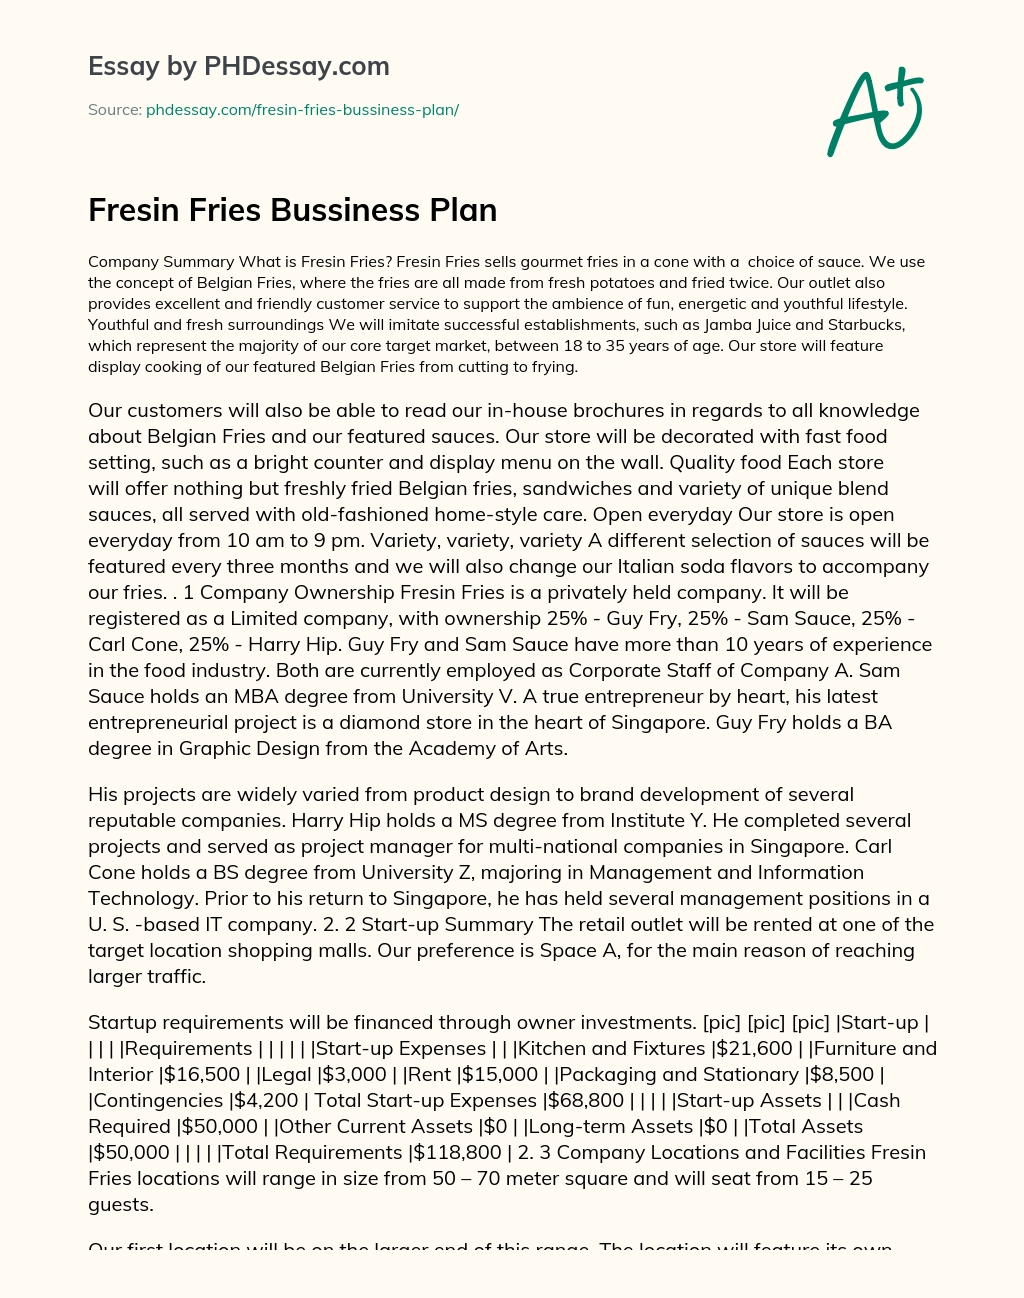 Fresin Fries Bussiness Plan essay